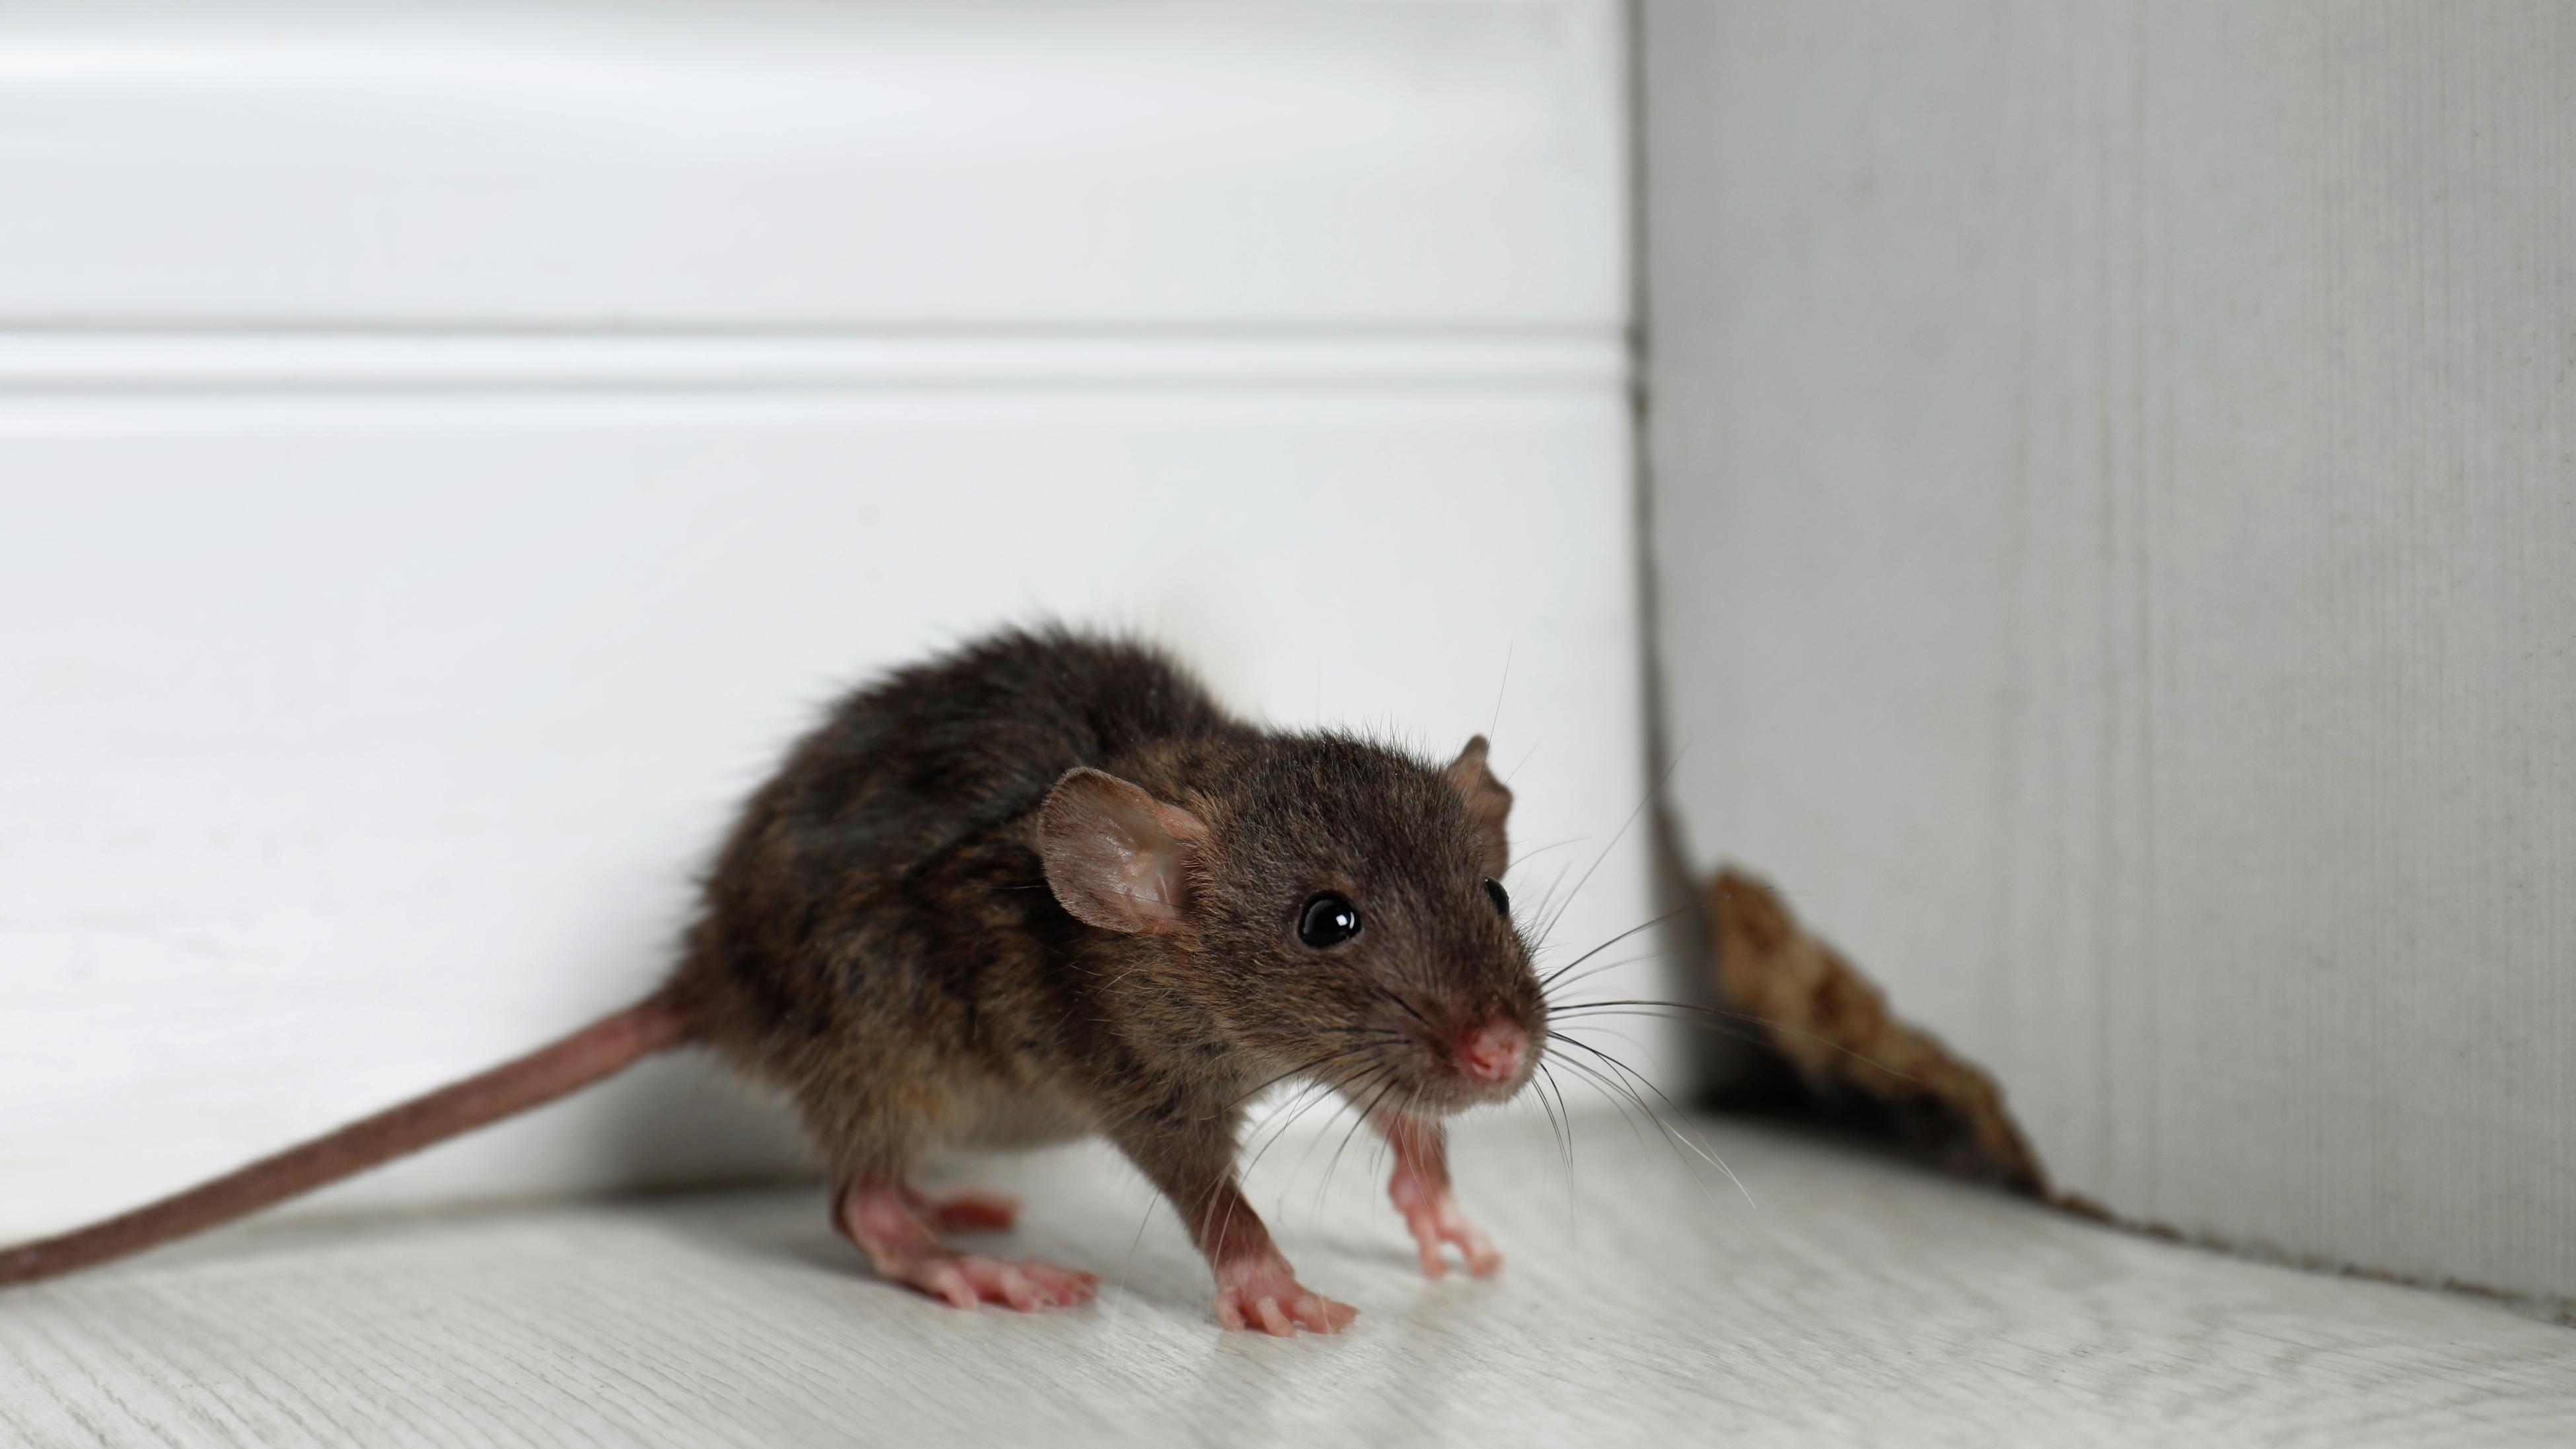 5 non-toxic ways to get rid of rats, according to pest control experts